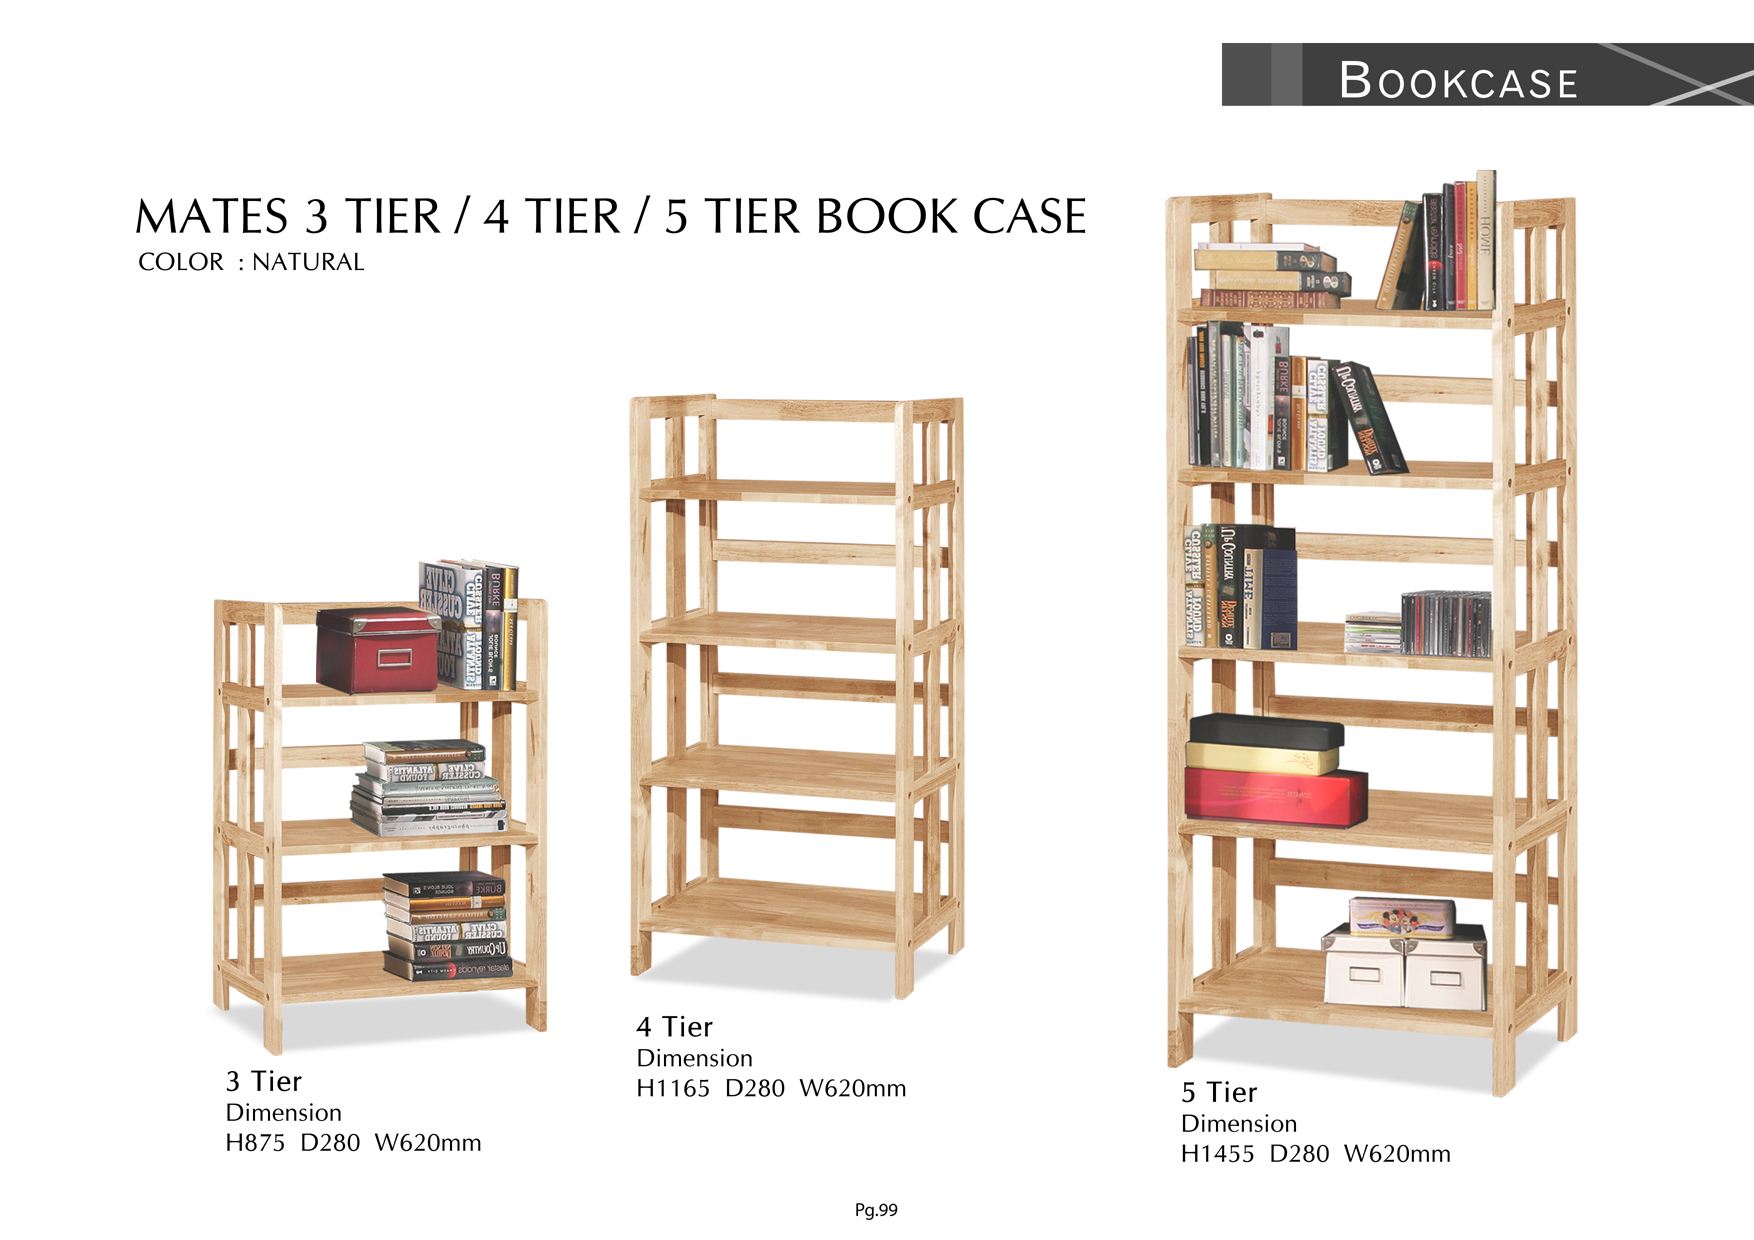 Product: PG99. MATES TIER BOOK CASE